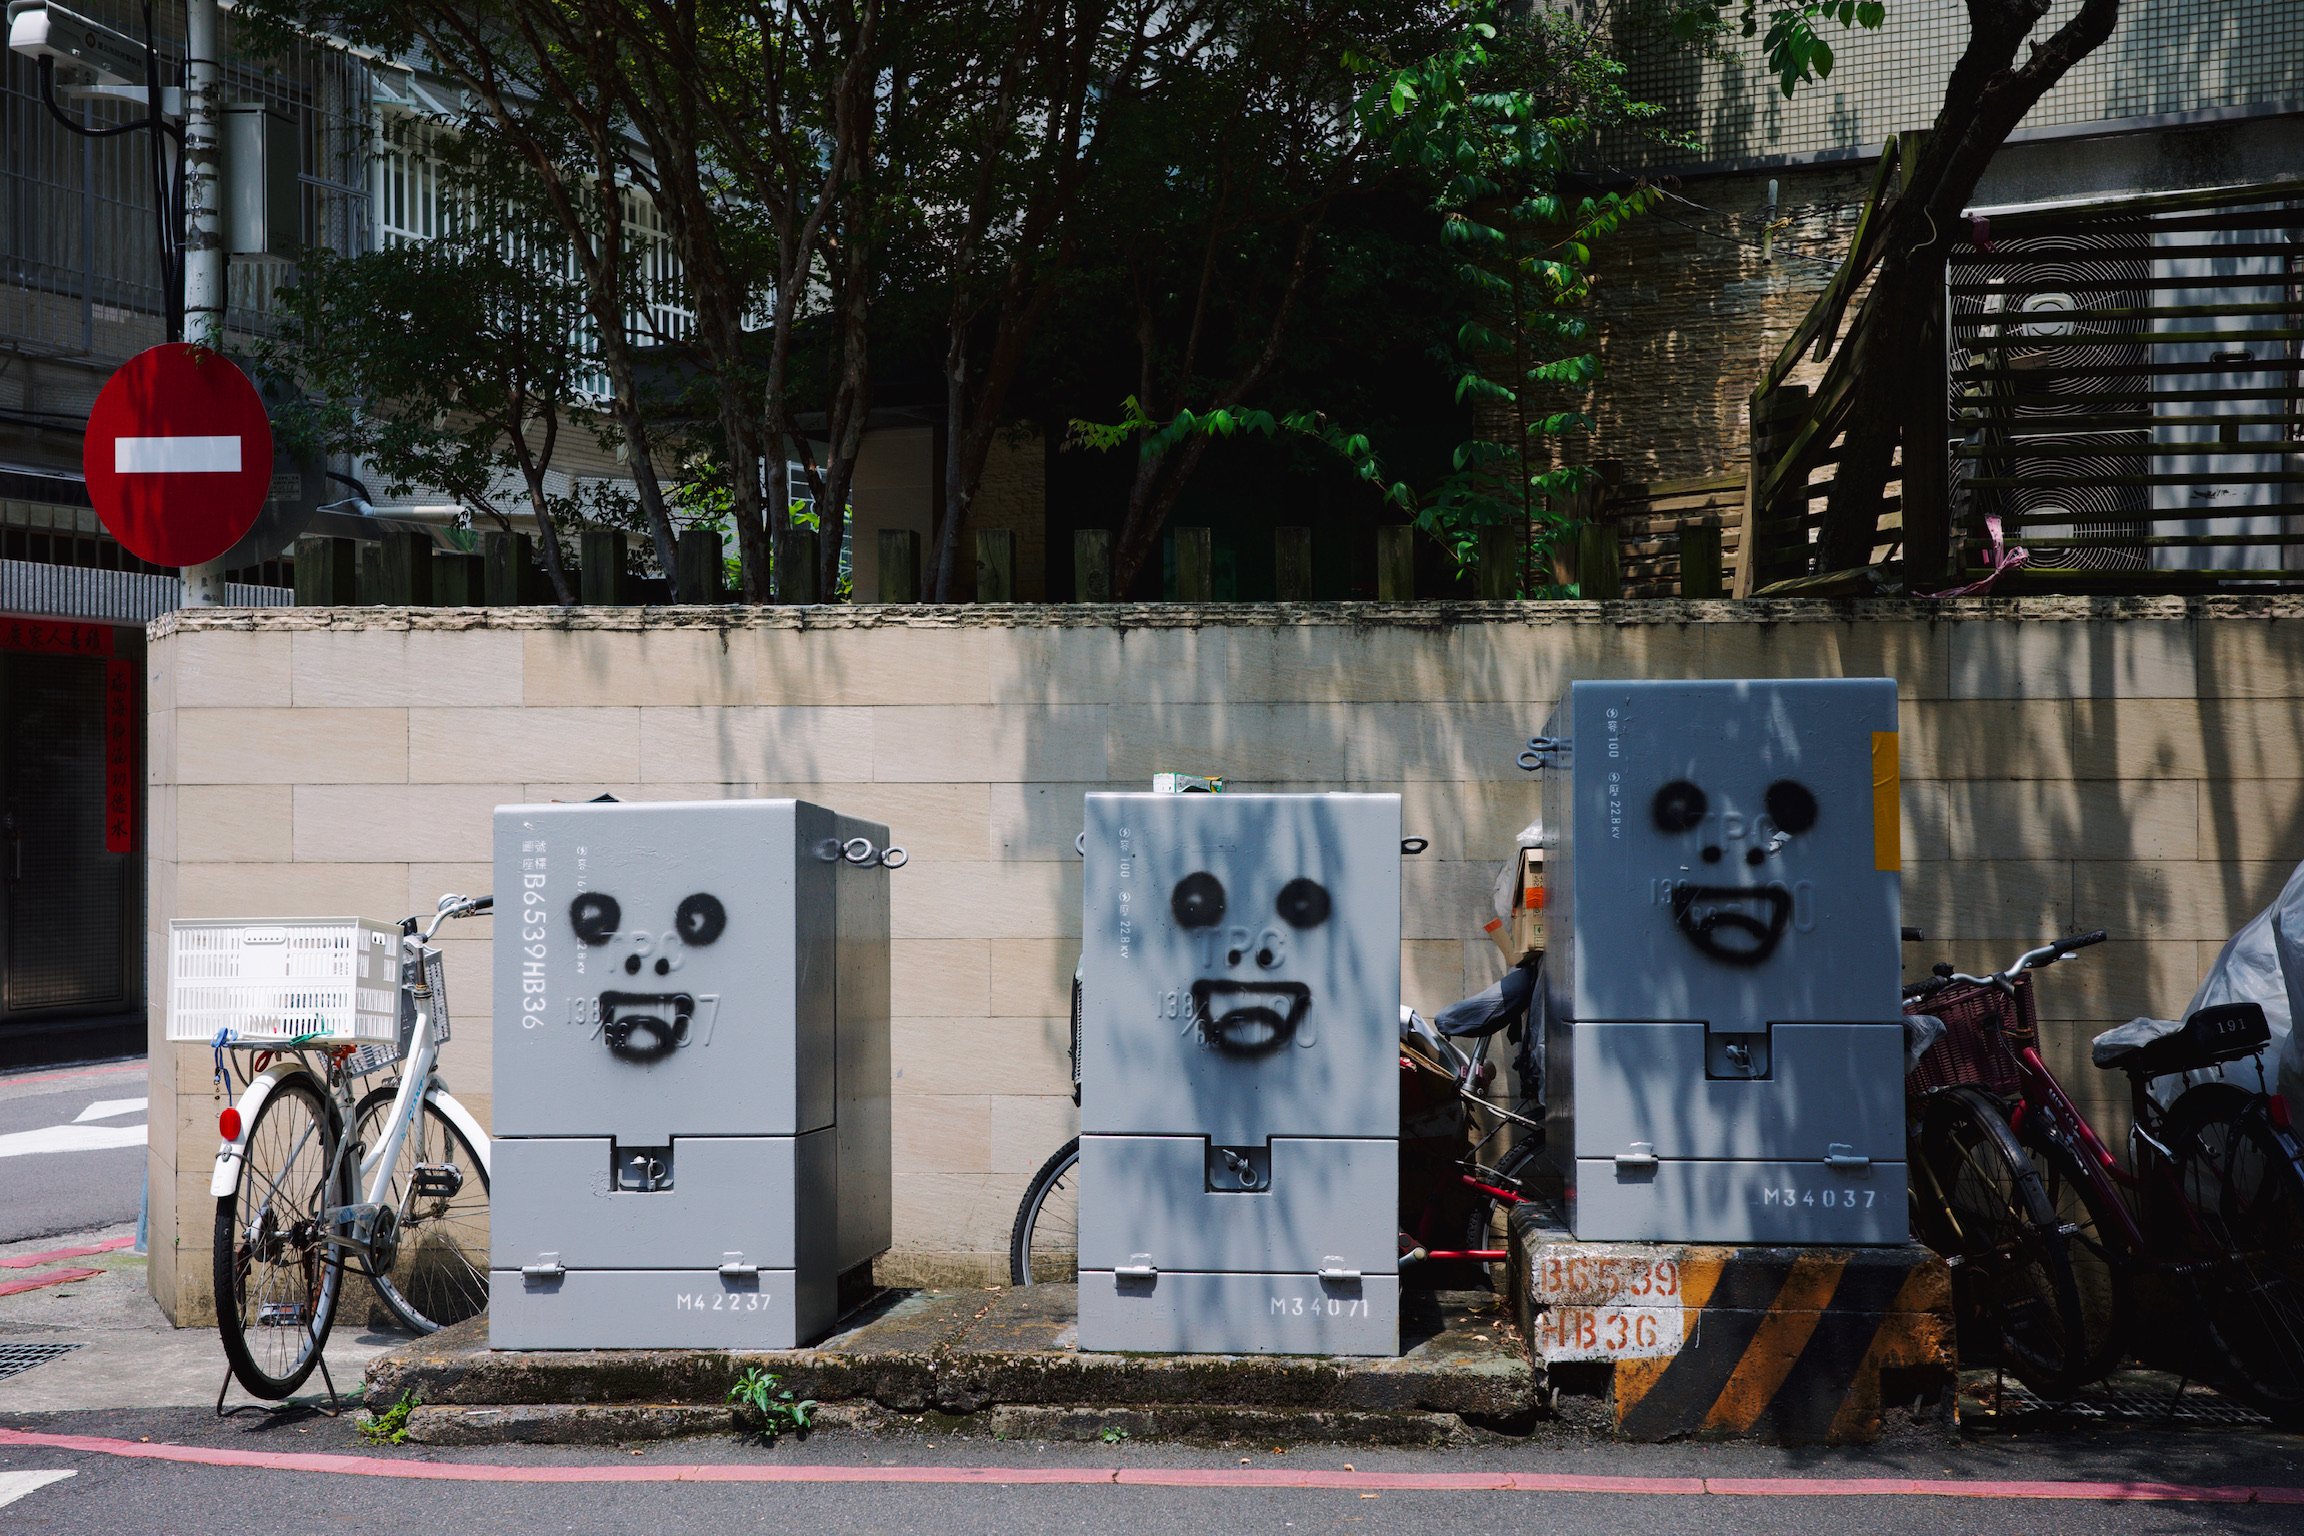 On a corner of a street there sat three gray transformer boxes with grimacing faces drawn on them.